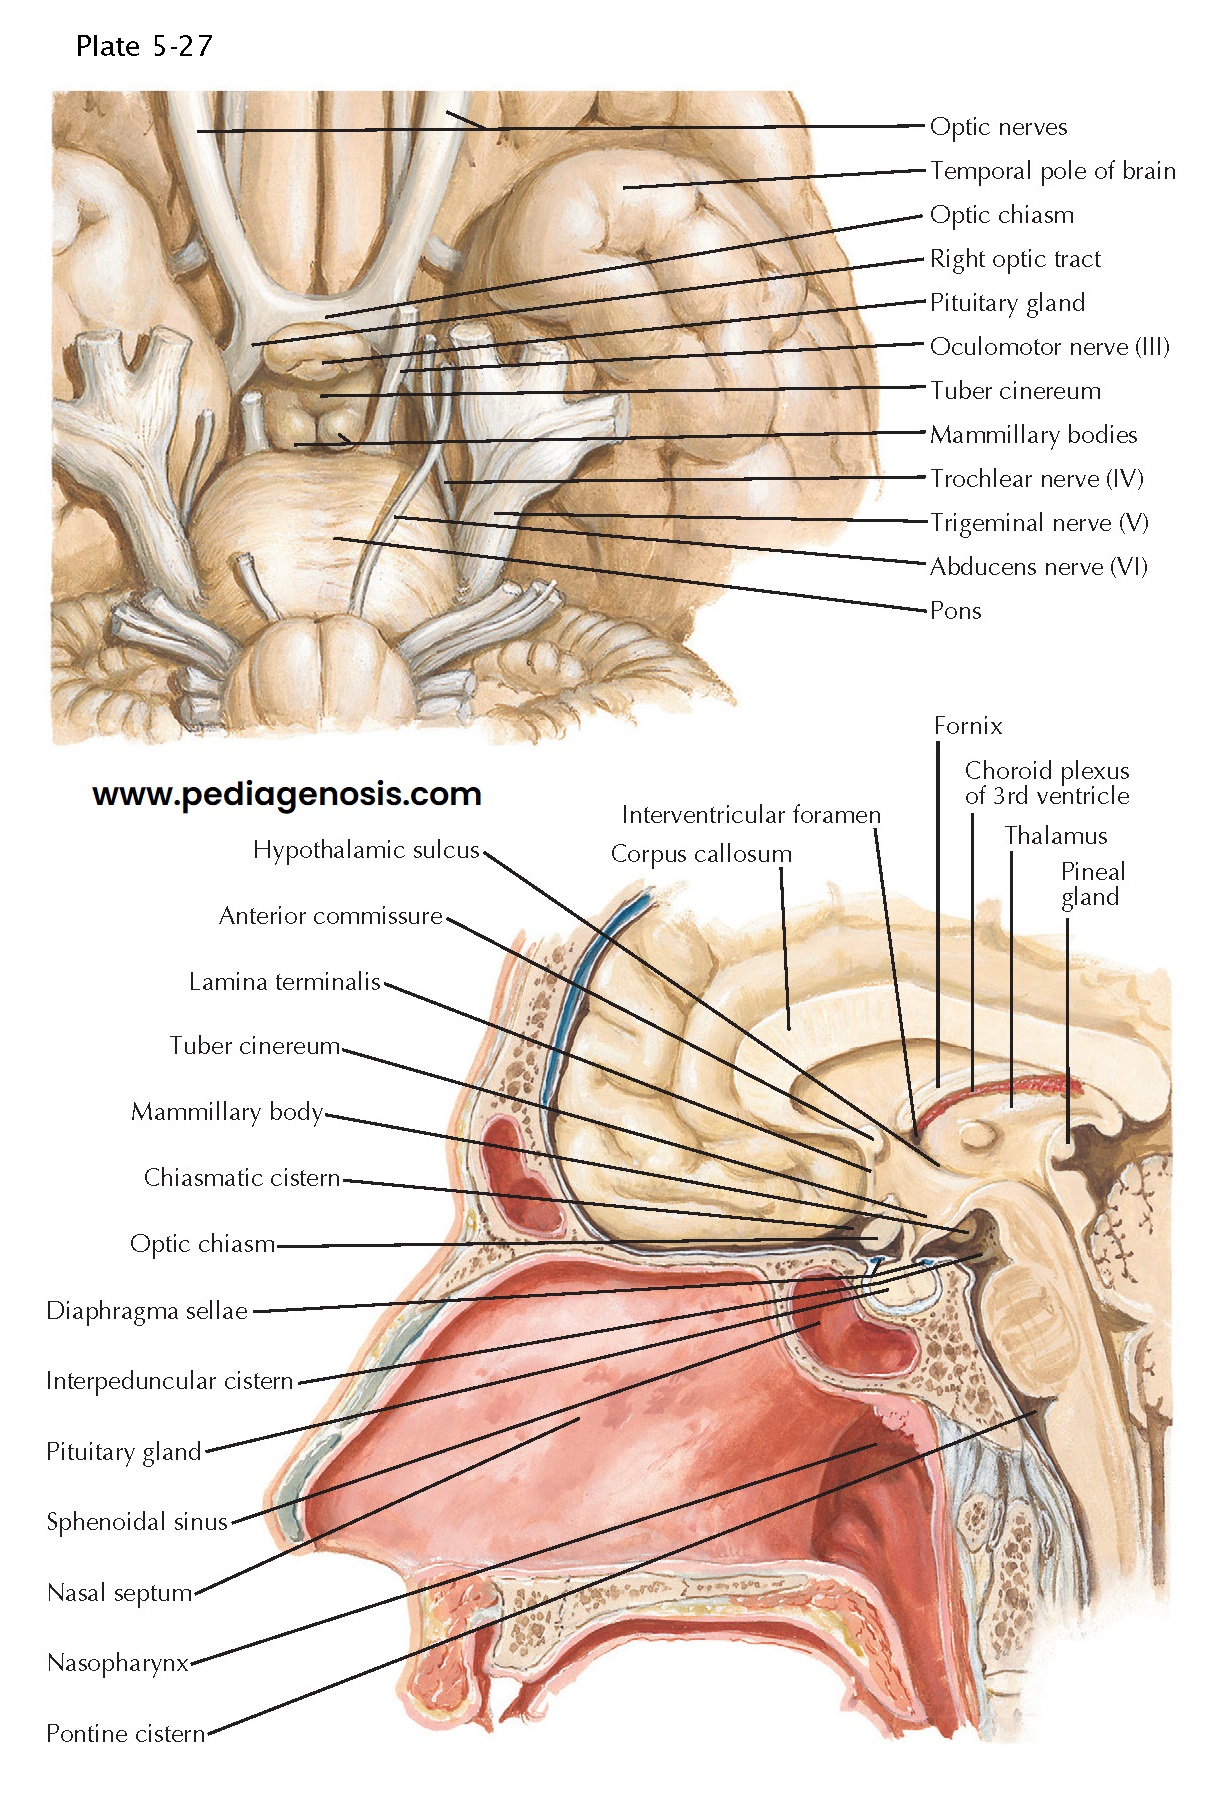 Anatomic Relationships of the Pituitary Gland